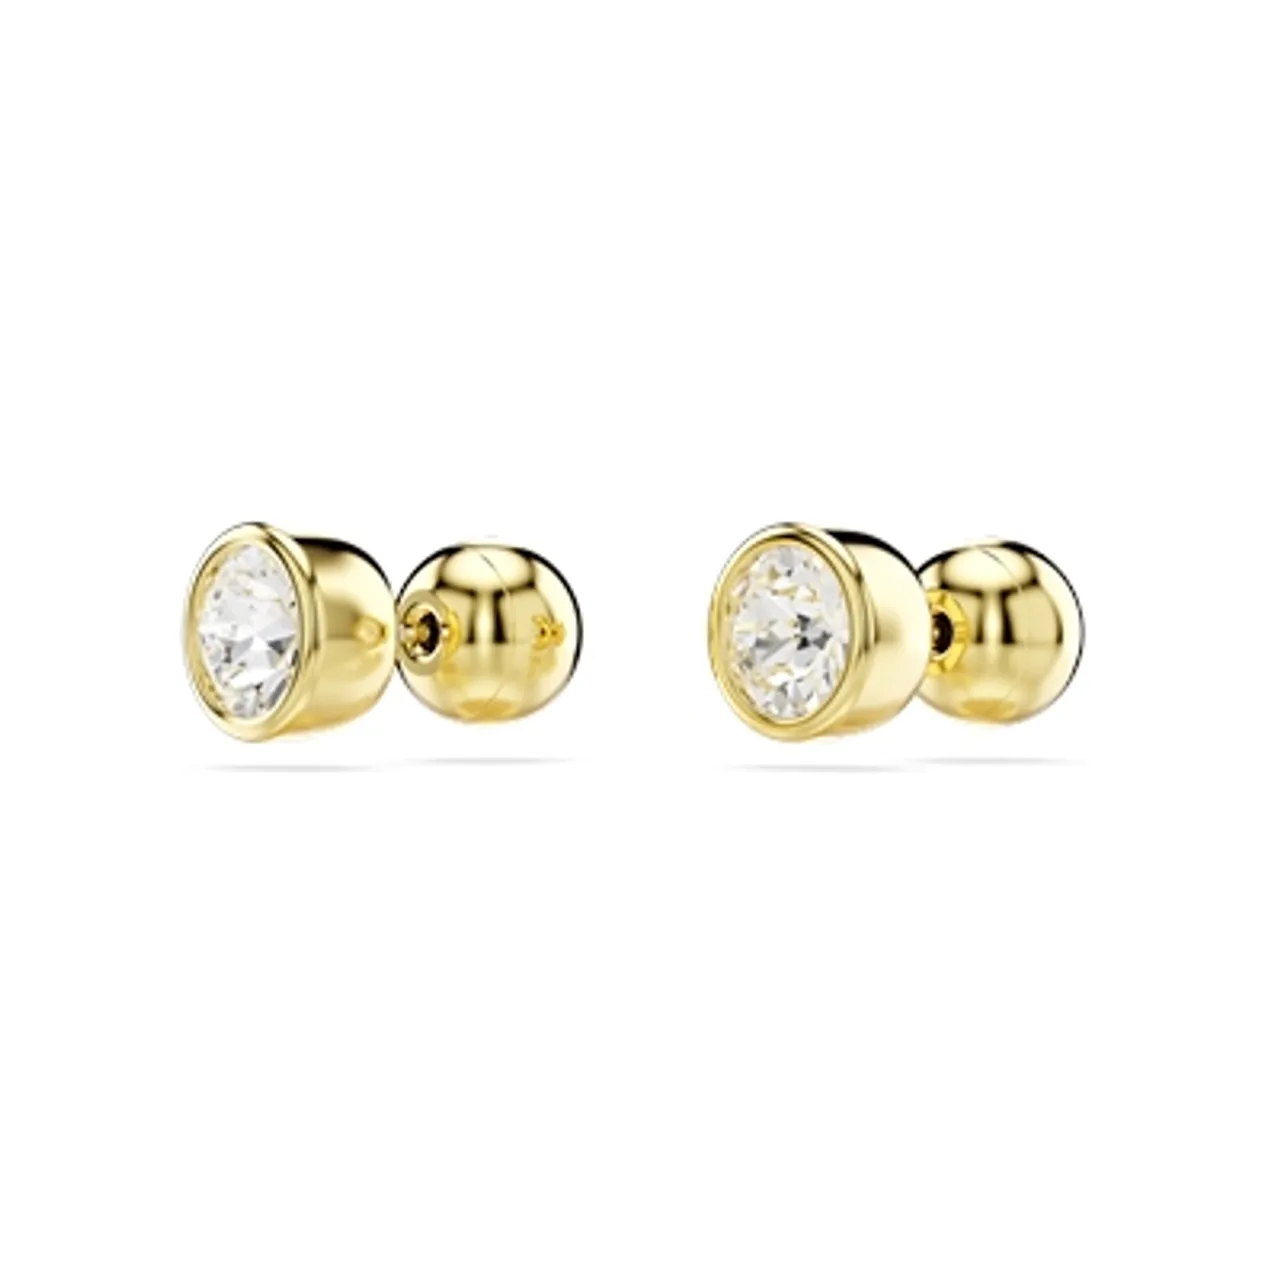 Swarovski Imber Round Cut White Crystal Gold-Tone Plated Stud Earrings